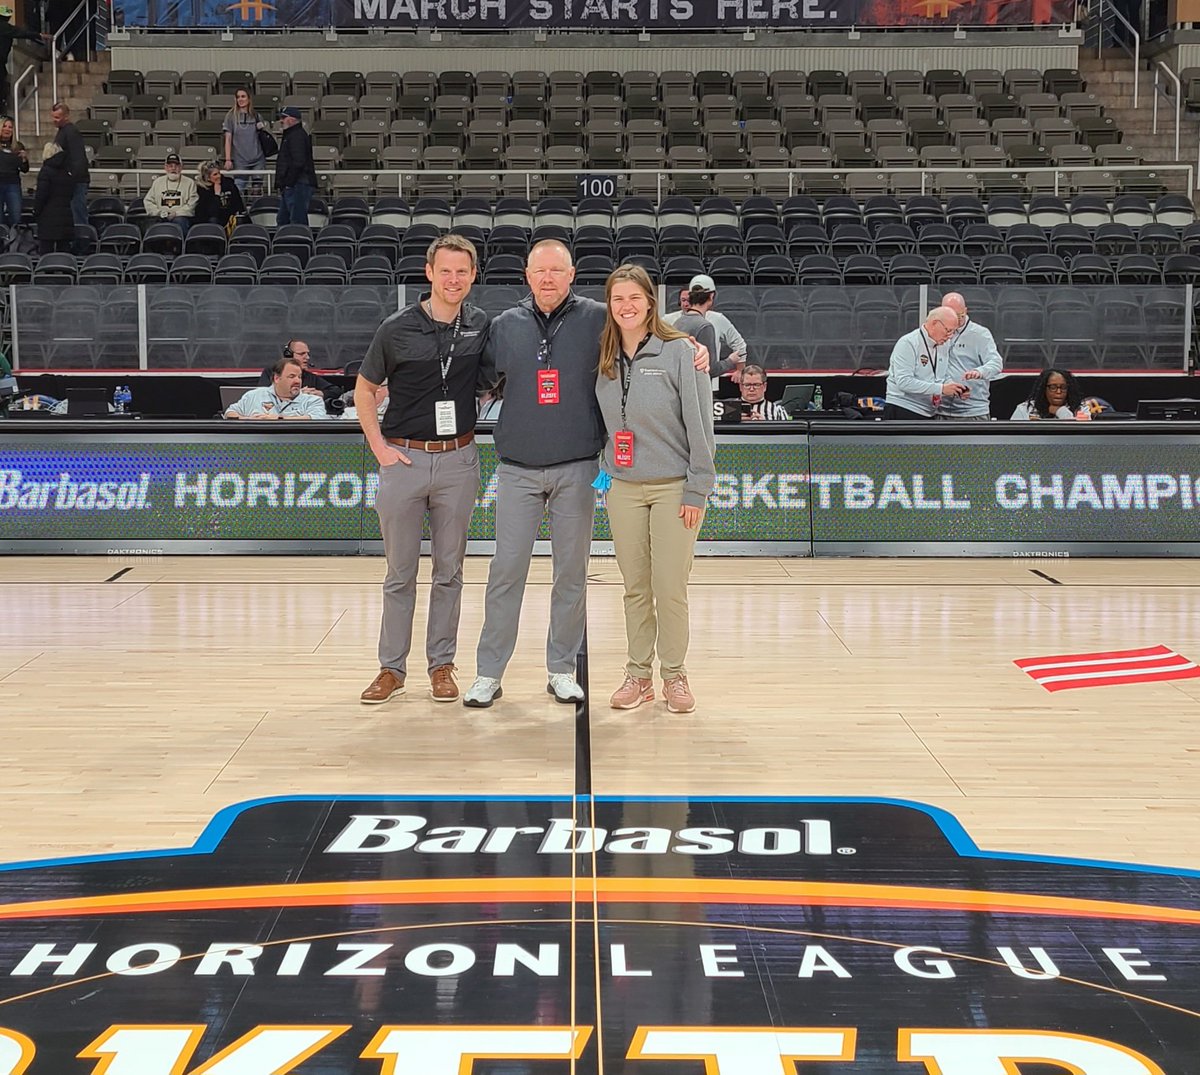 Congratulations to @HorizonLeague for another successful Men's & Women's Basketball Tournament & THANK YOU for allowing @MyFranciscan Sports Medicine to be your medical partner! Good luck to @gbphoenixwbb & @OaklandMBB!! #MarchMadness